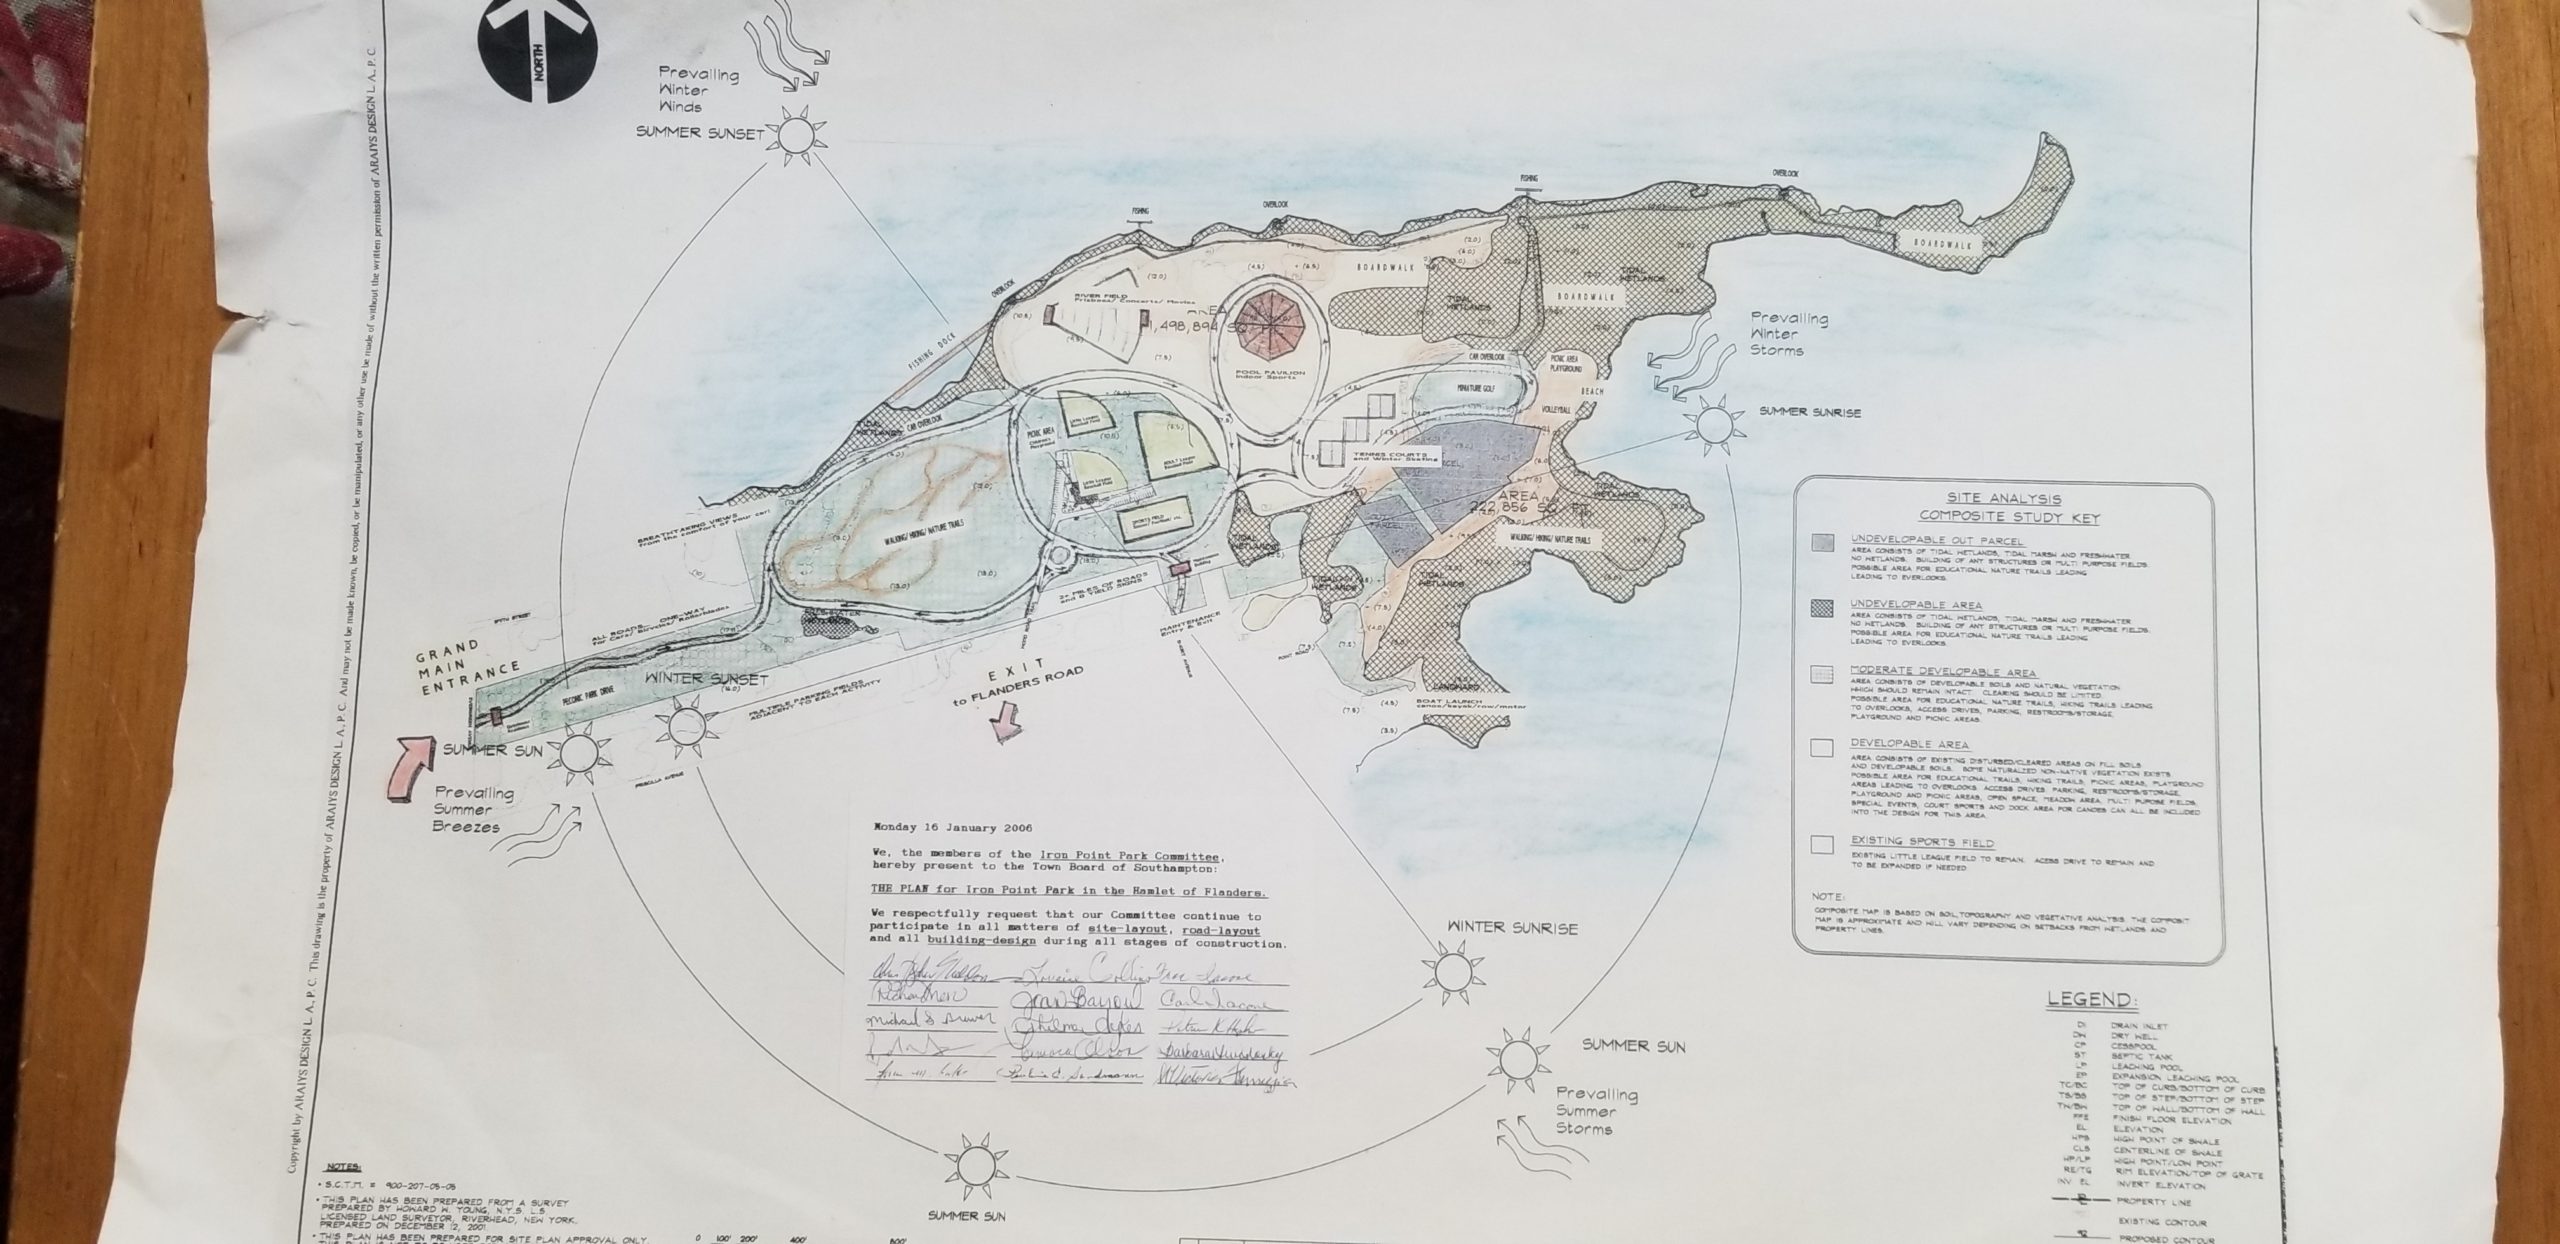 The original map of plans for Iron Point Park.